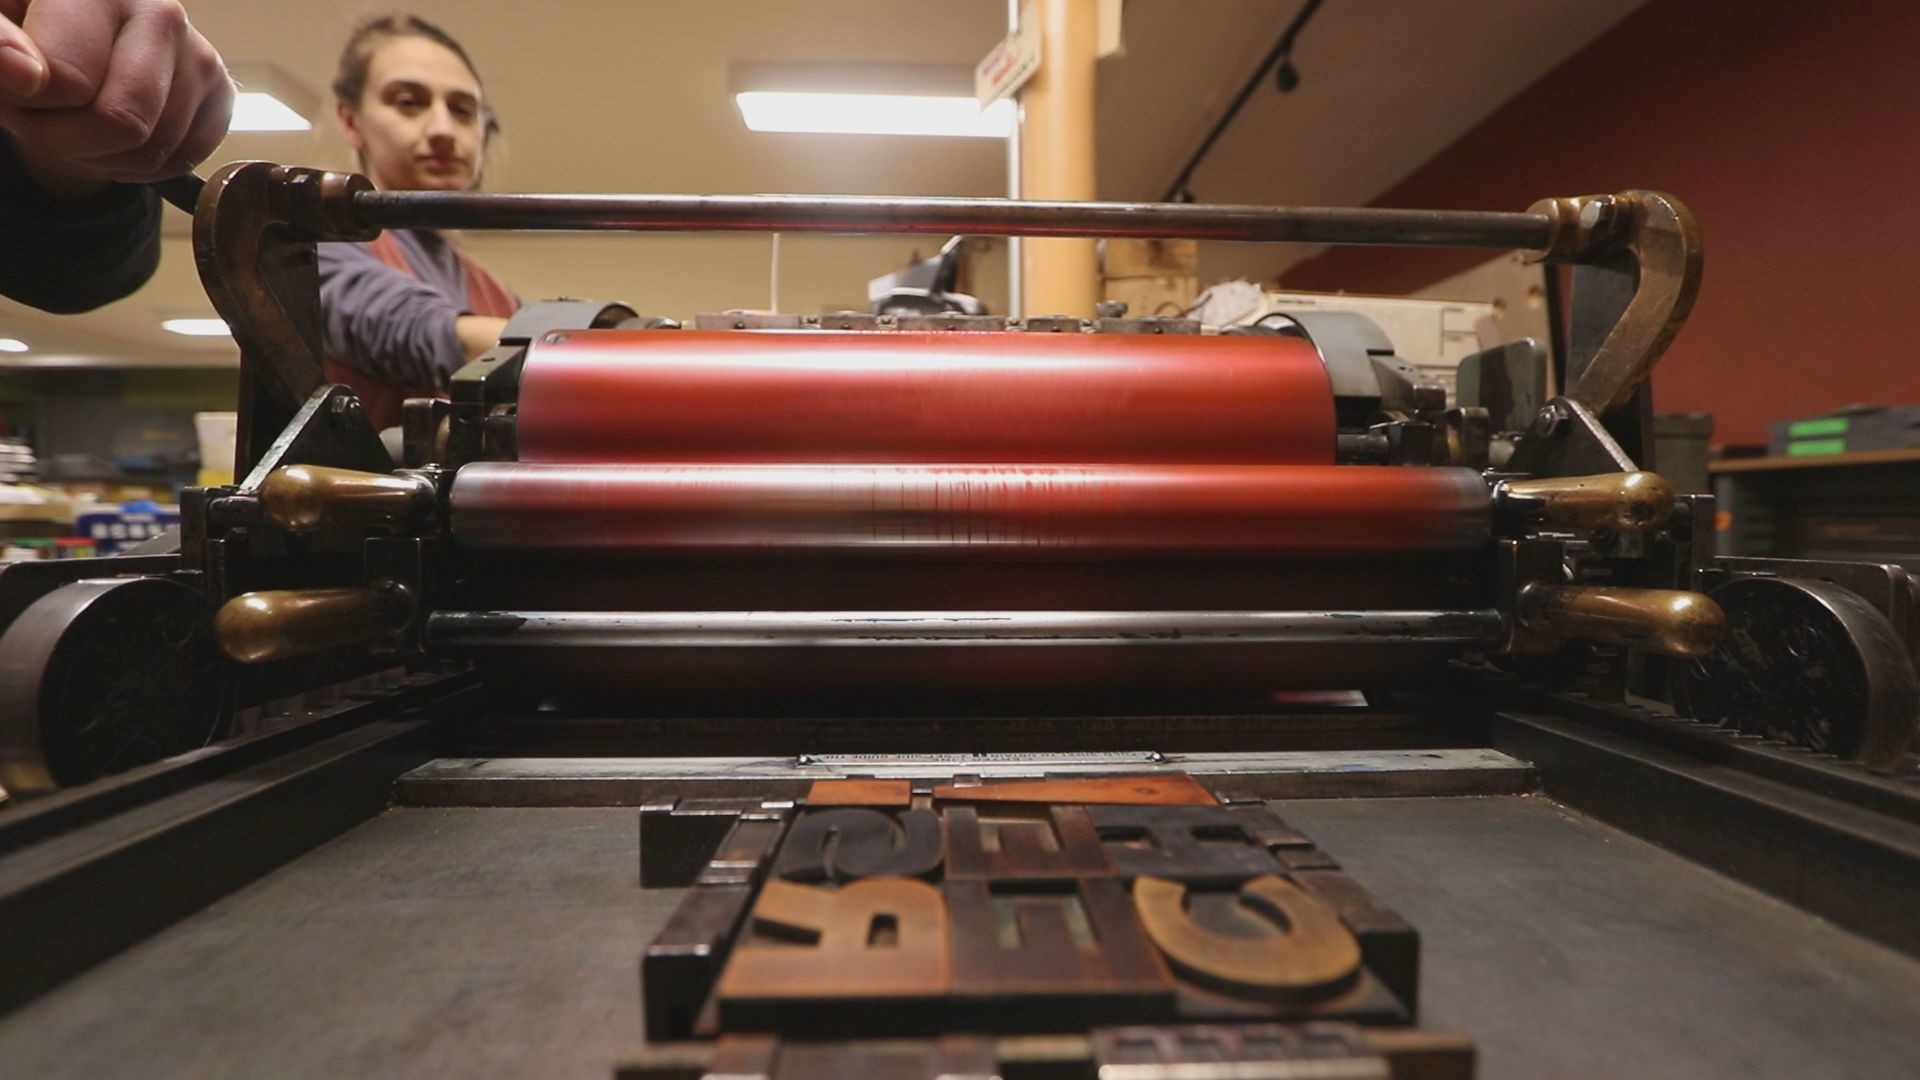 The Western New York Book Arts Center is home to some incredible printing presses. They're hosting a gala to fundraise for their education efforts across the city.